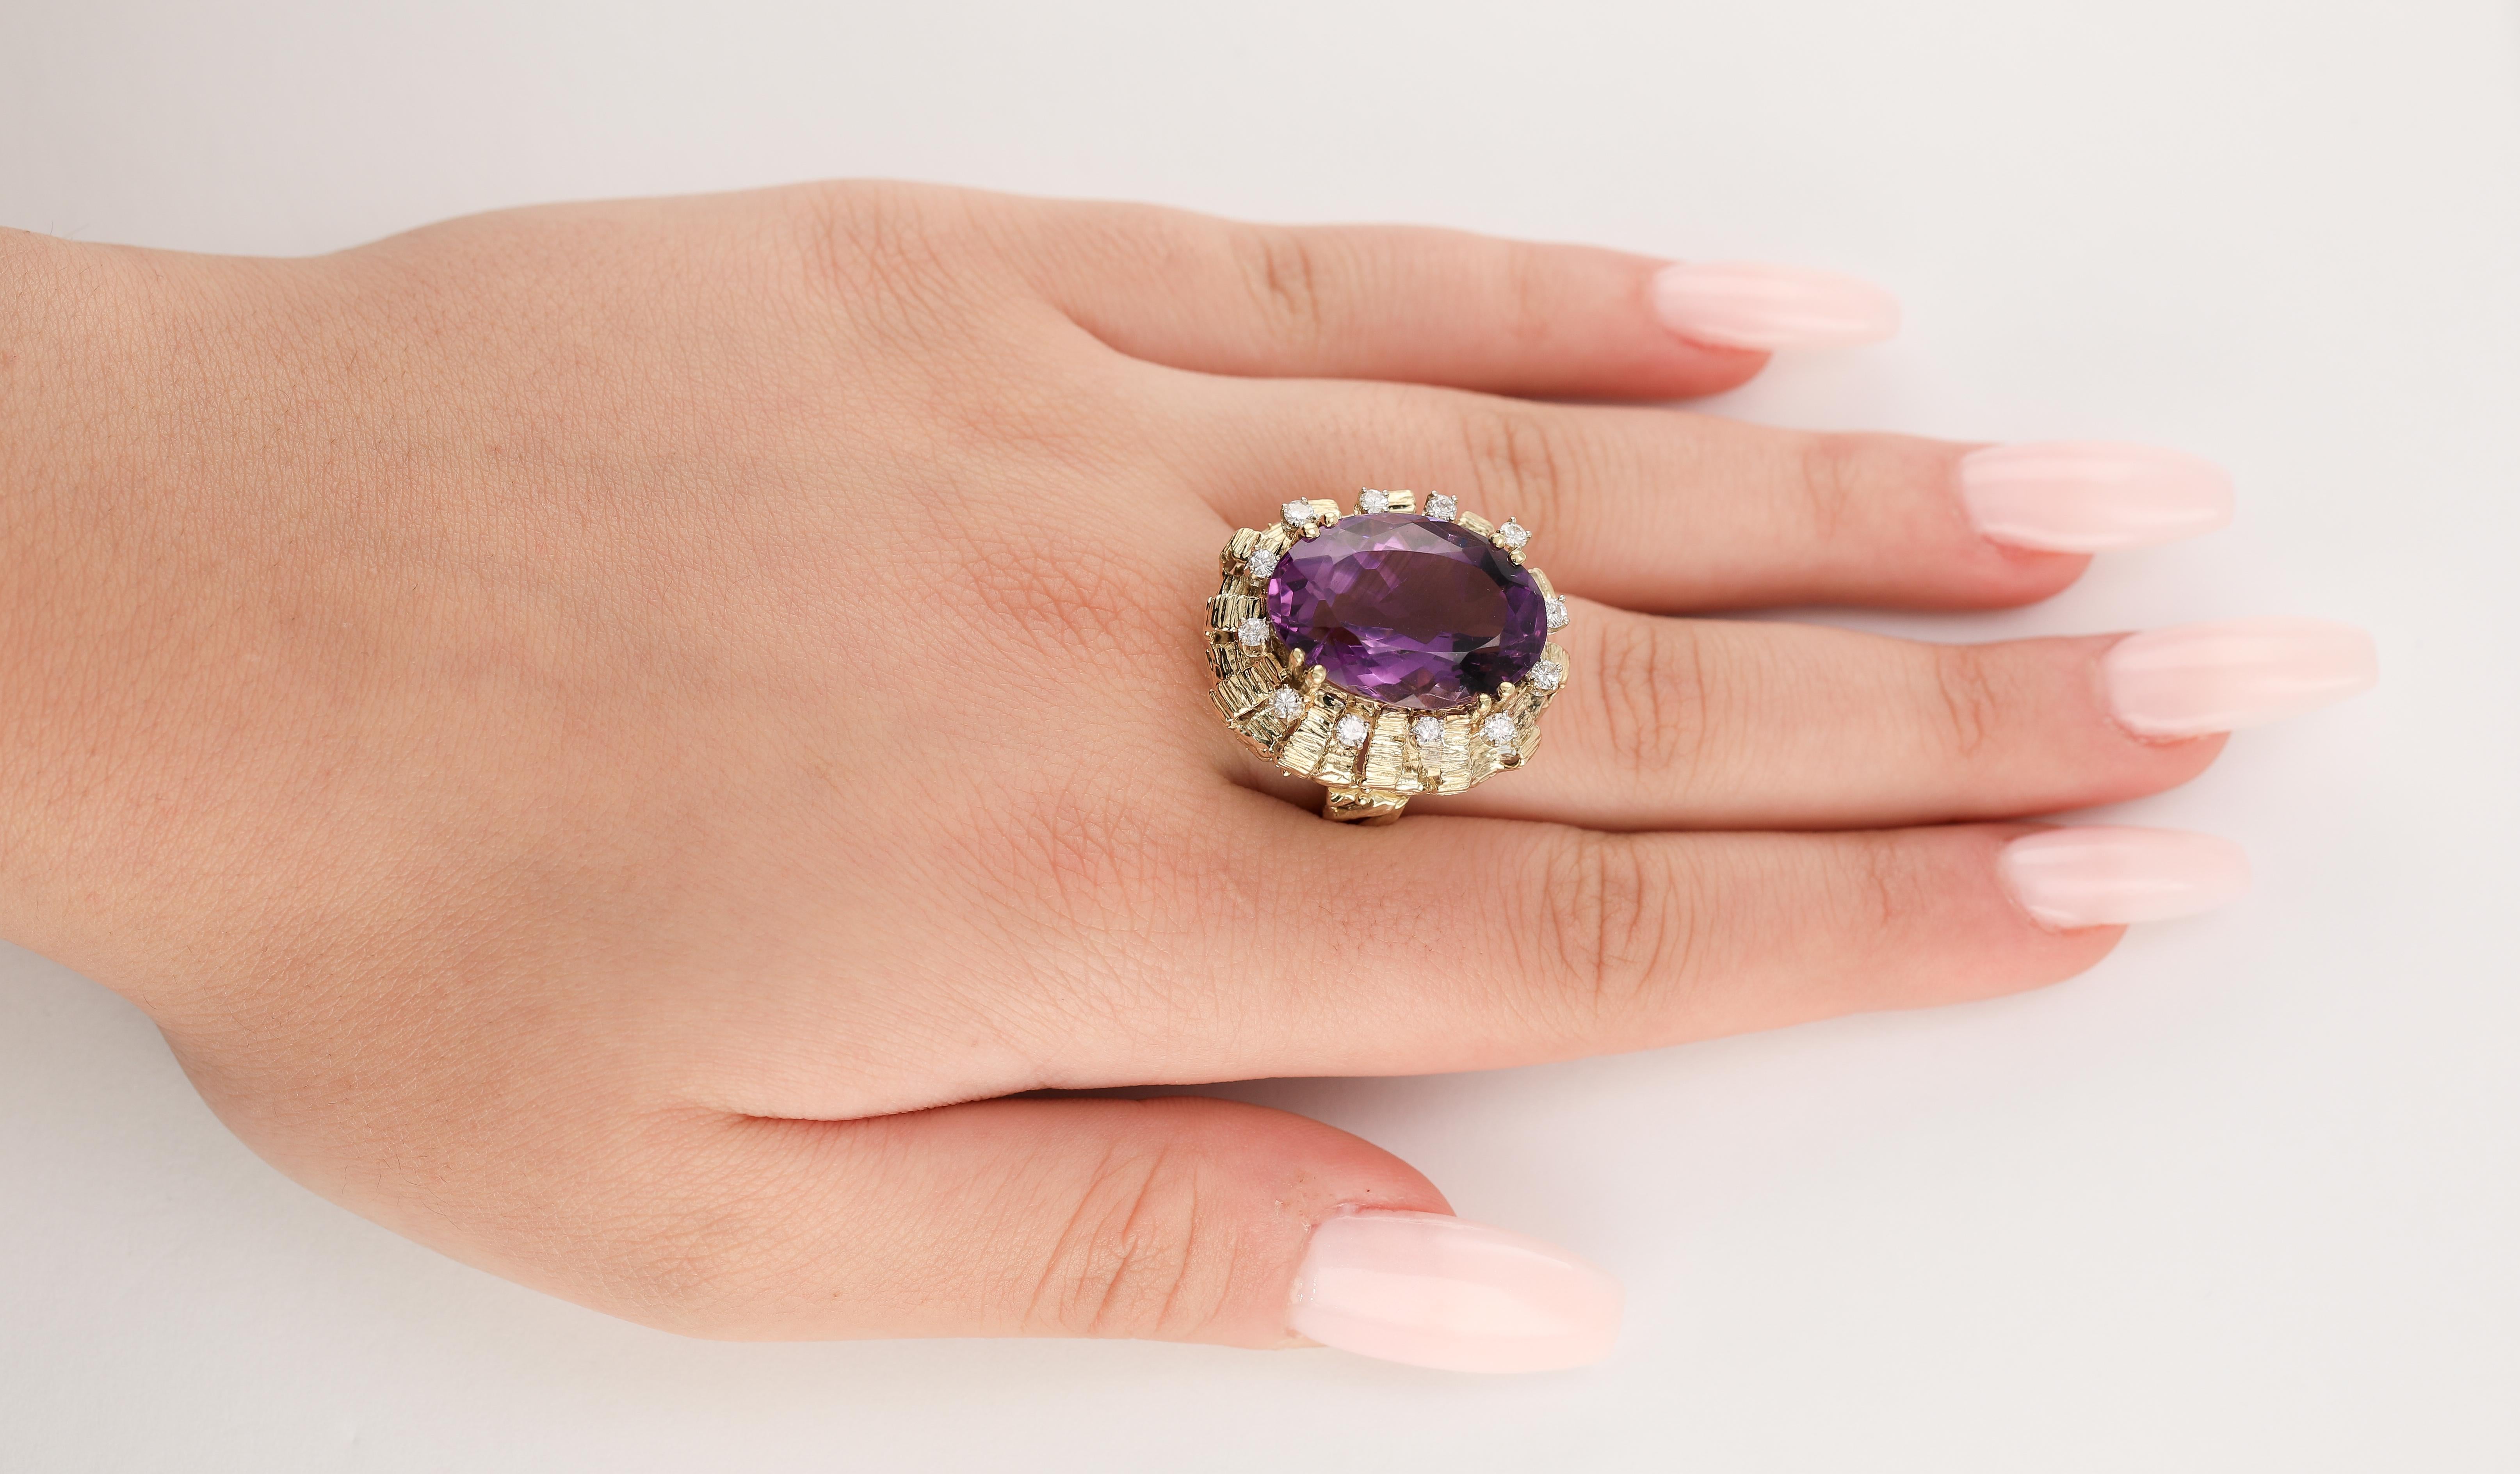 Huge Artistic Amethyst and Diamond Gold Cage Cocktail Ring
An Enormous solid gold cocktail ring circa 1960's. This lovely ring consists of a 22.0 mm x 12.0 mm oval cut natural amethyst totaling approx 30.0 carats, held in a double four-pronged